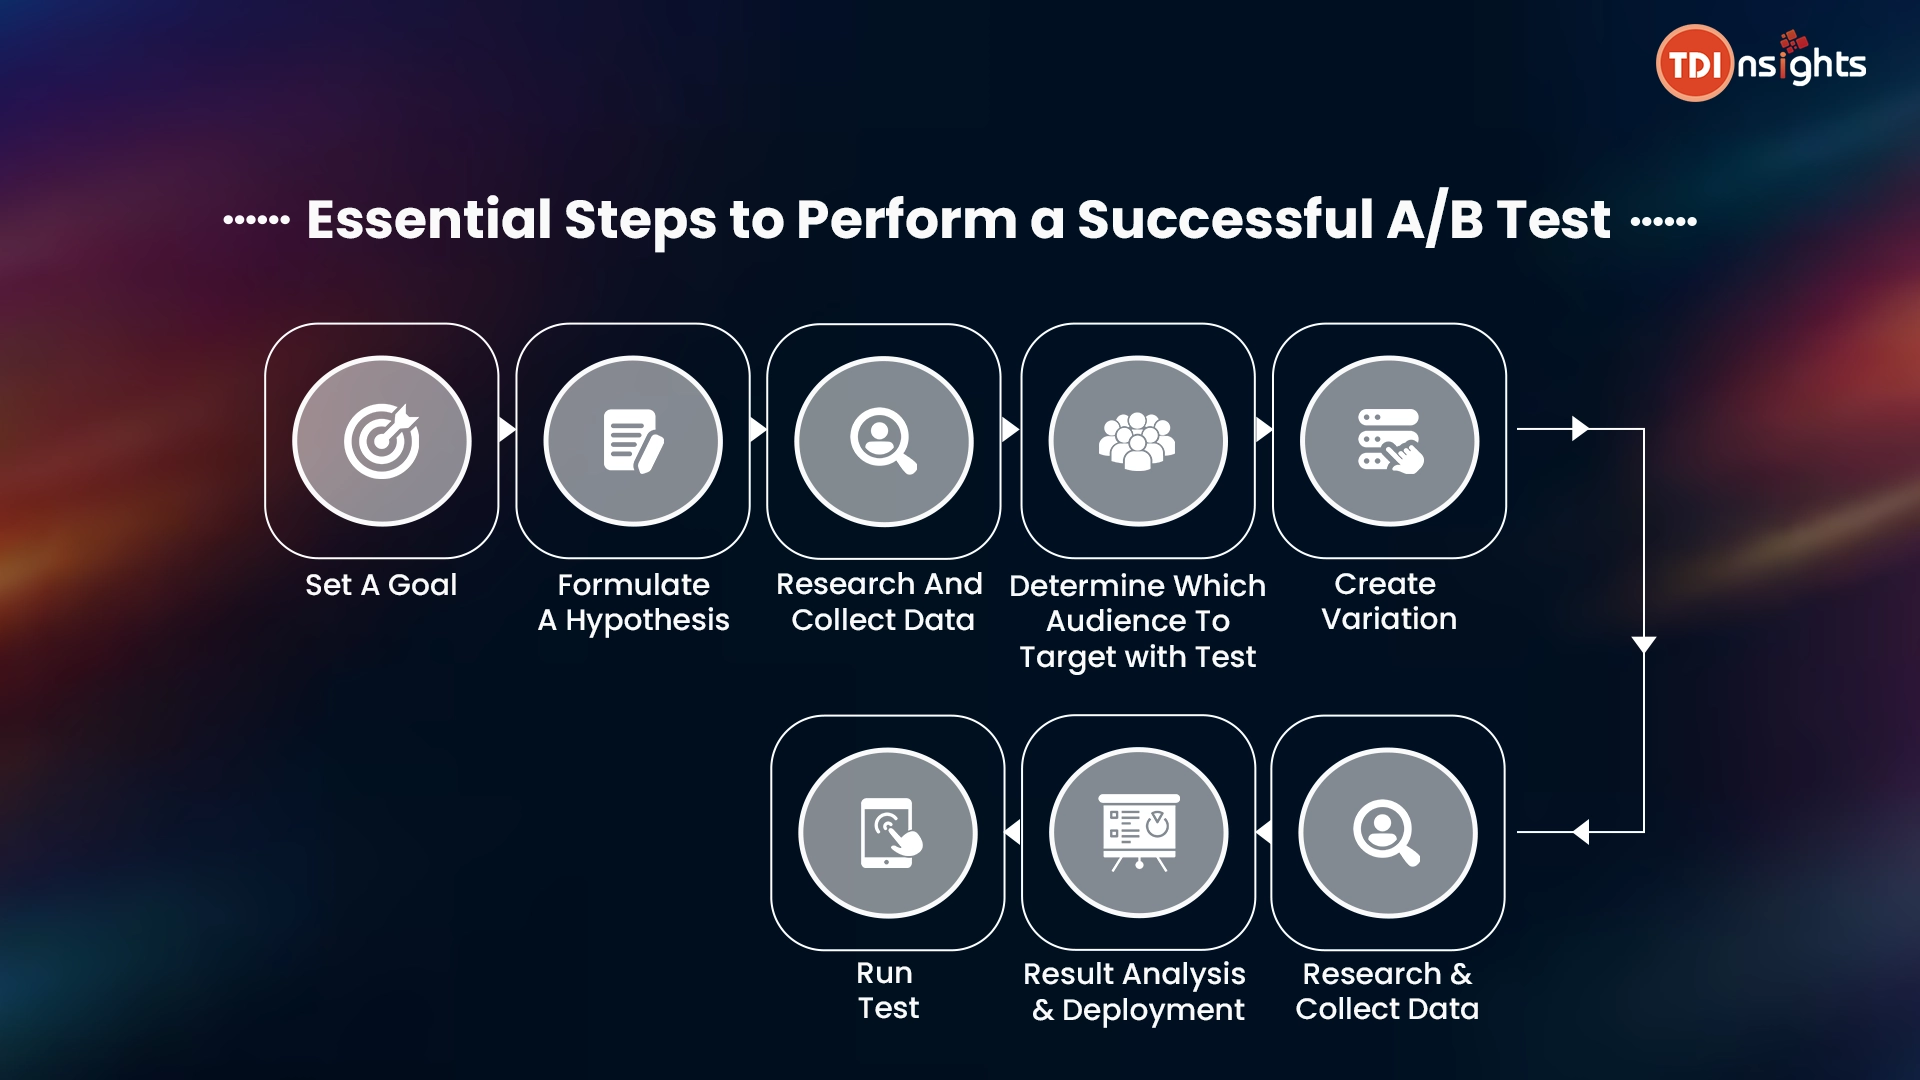 Essential-Steps-to-Perform-a-Successful-A-B-Test